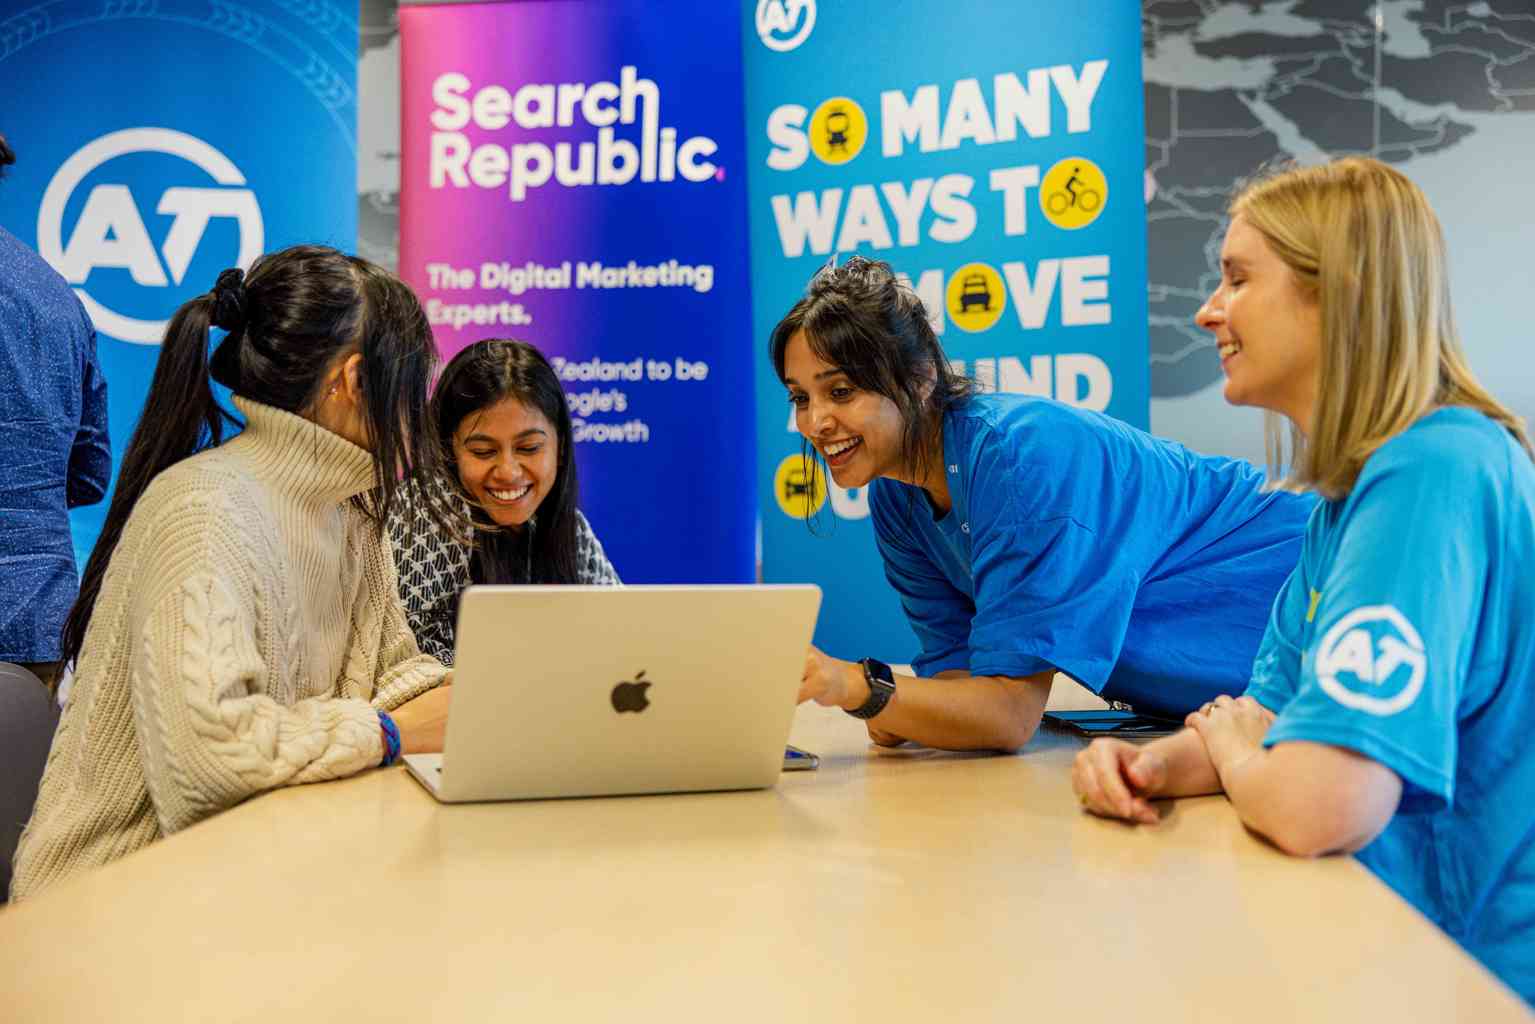 Four women gathered around an Apple laptop, one leaning over and pointing at the screen. Two women in AT logo shirts are helping the other 2, and branded banners hang in the background.